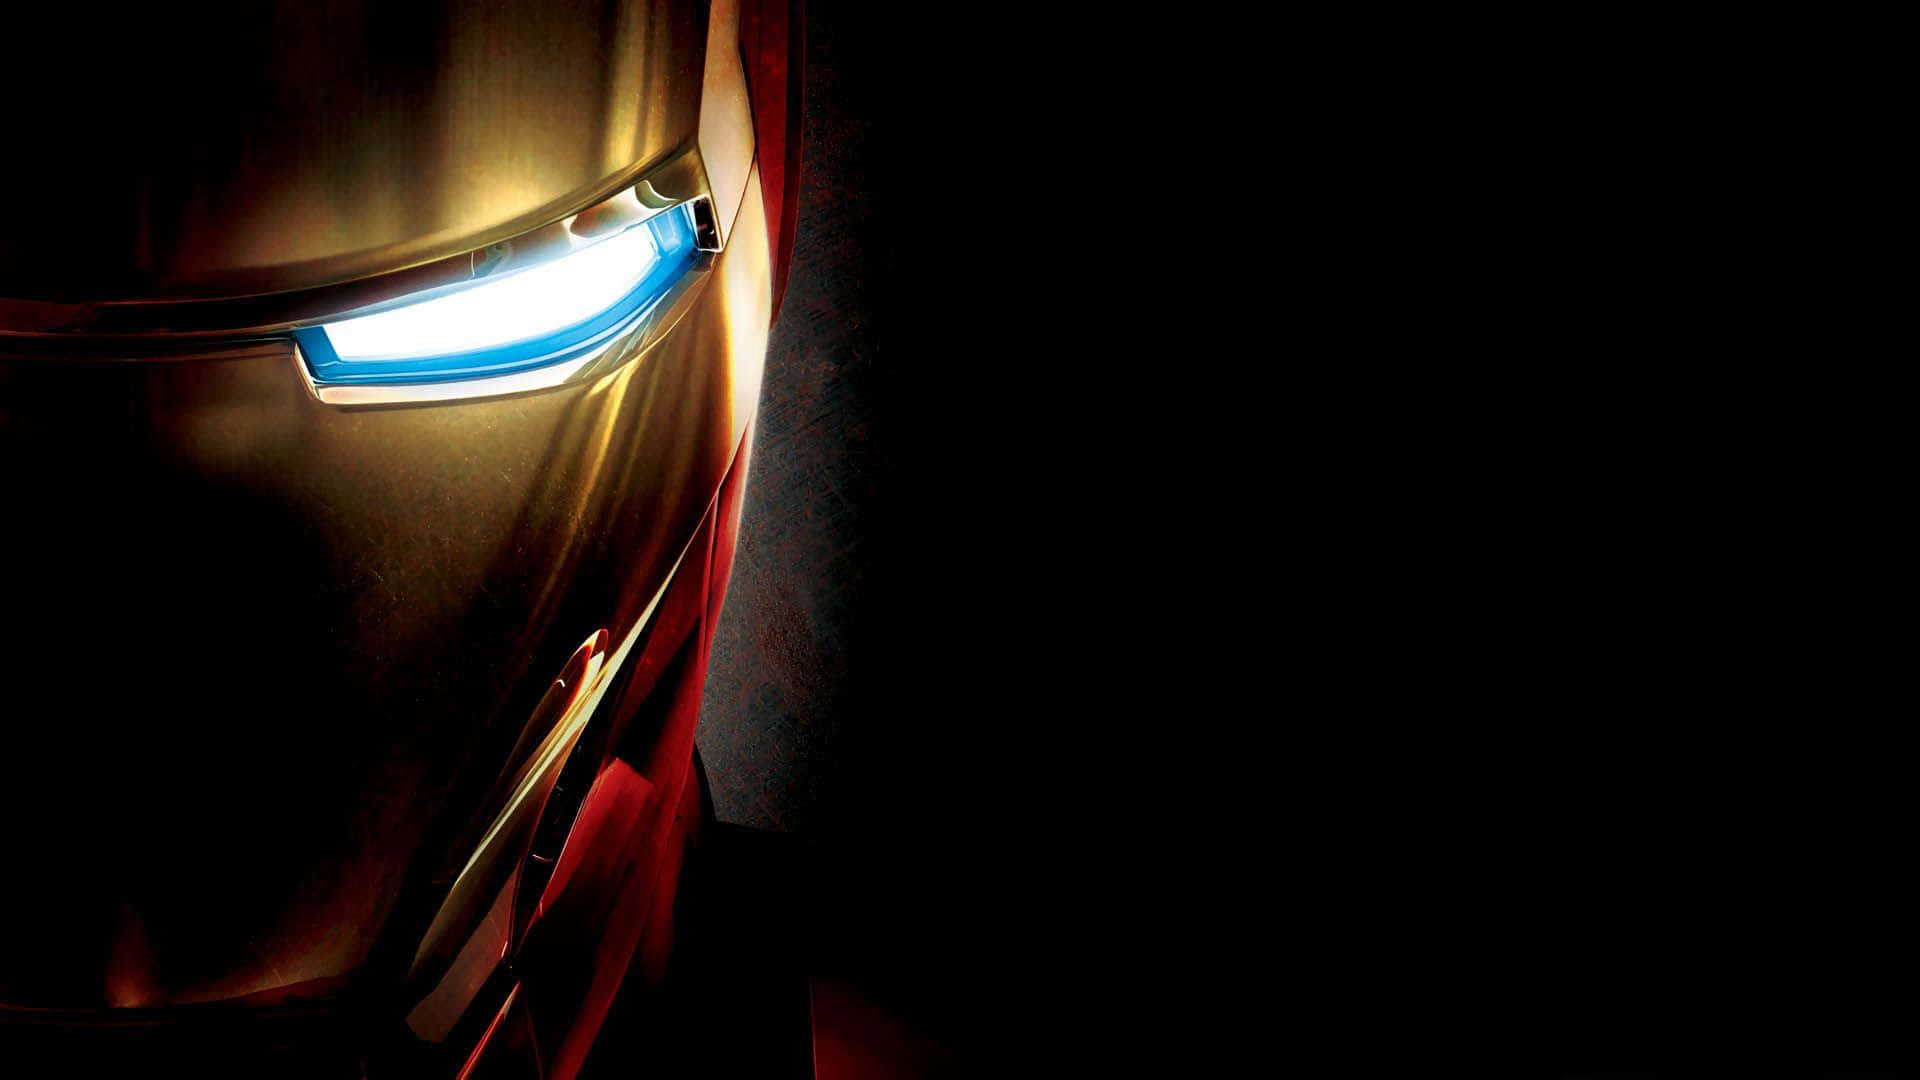 Iron Man 3: Iron Man Suited Up For Battle